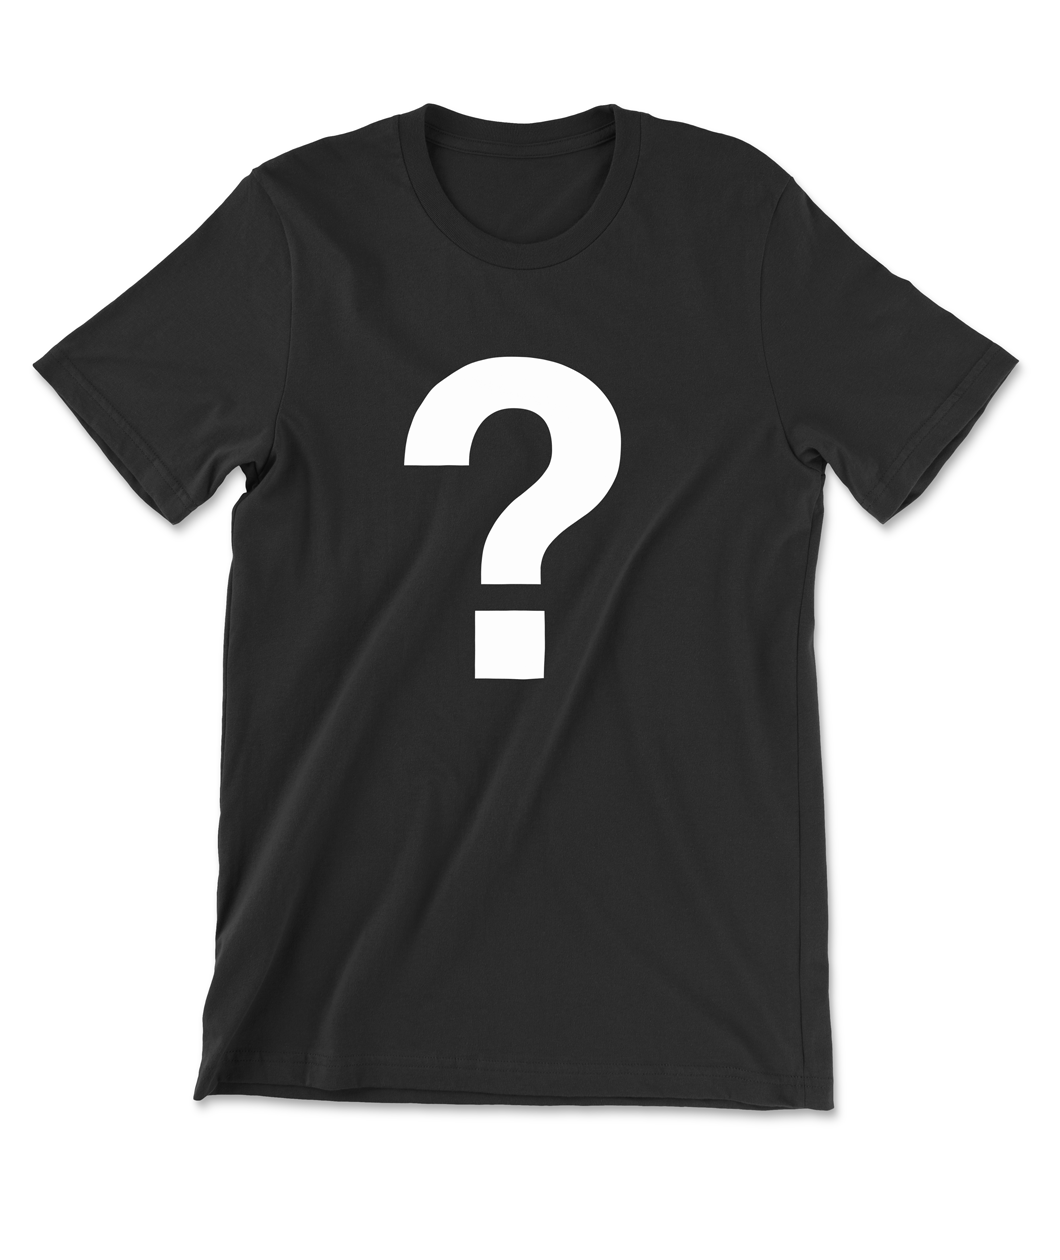 A black t-shirt with a big white question mark on the front representing the Mars Heyward mystery shirt sale. 